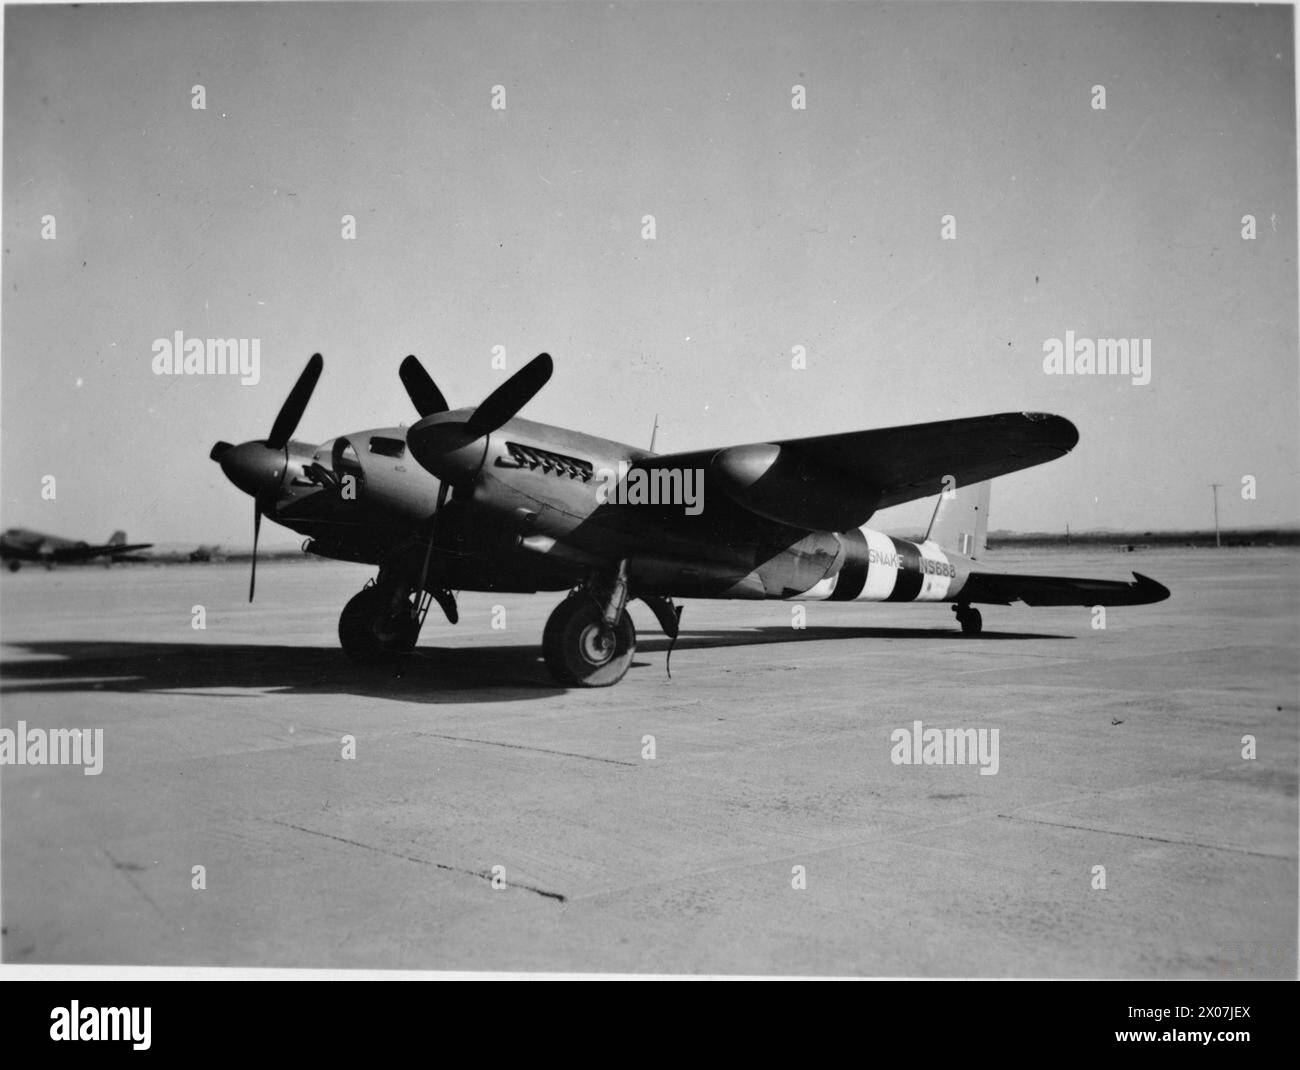 ROYAL AIR FORCE OPERATIONS IN THE FAR EAST, 1941-1945. - De Havilland Mosquito PR Mark XVI, NS688 'SNAKE', on the ground at Karachi, India, following a record-breaking flight from the United Kingdom. The pilot, Flight Lieutenant J Linton, and his navigator, Warrant Officer E J Goudie, covered the distance in an overall time of 16 hours 46 minutes, (with stops at El Adem, Libya, and Shaibah), to beat the existing record by 5 hours and 27 minutes. The flight was undertaken to test the practicability of RAF Transport Command using the Mosquito for a fast freight service between Britain and India. Stock Photo